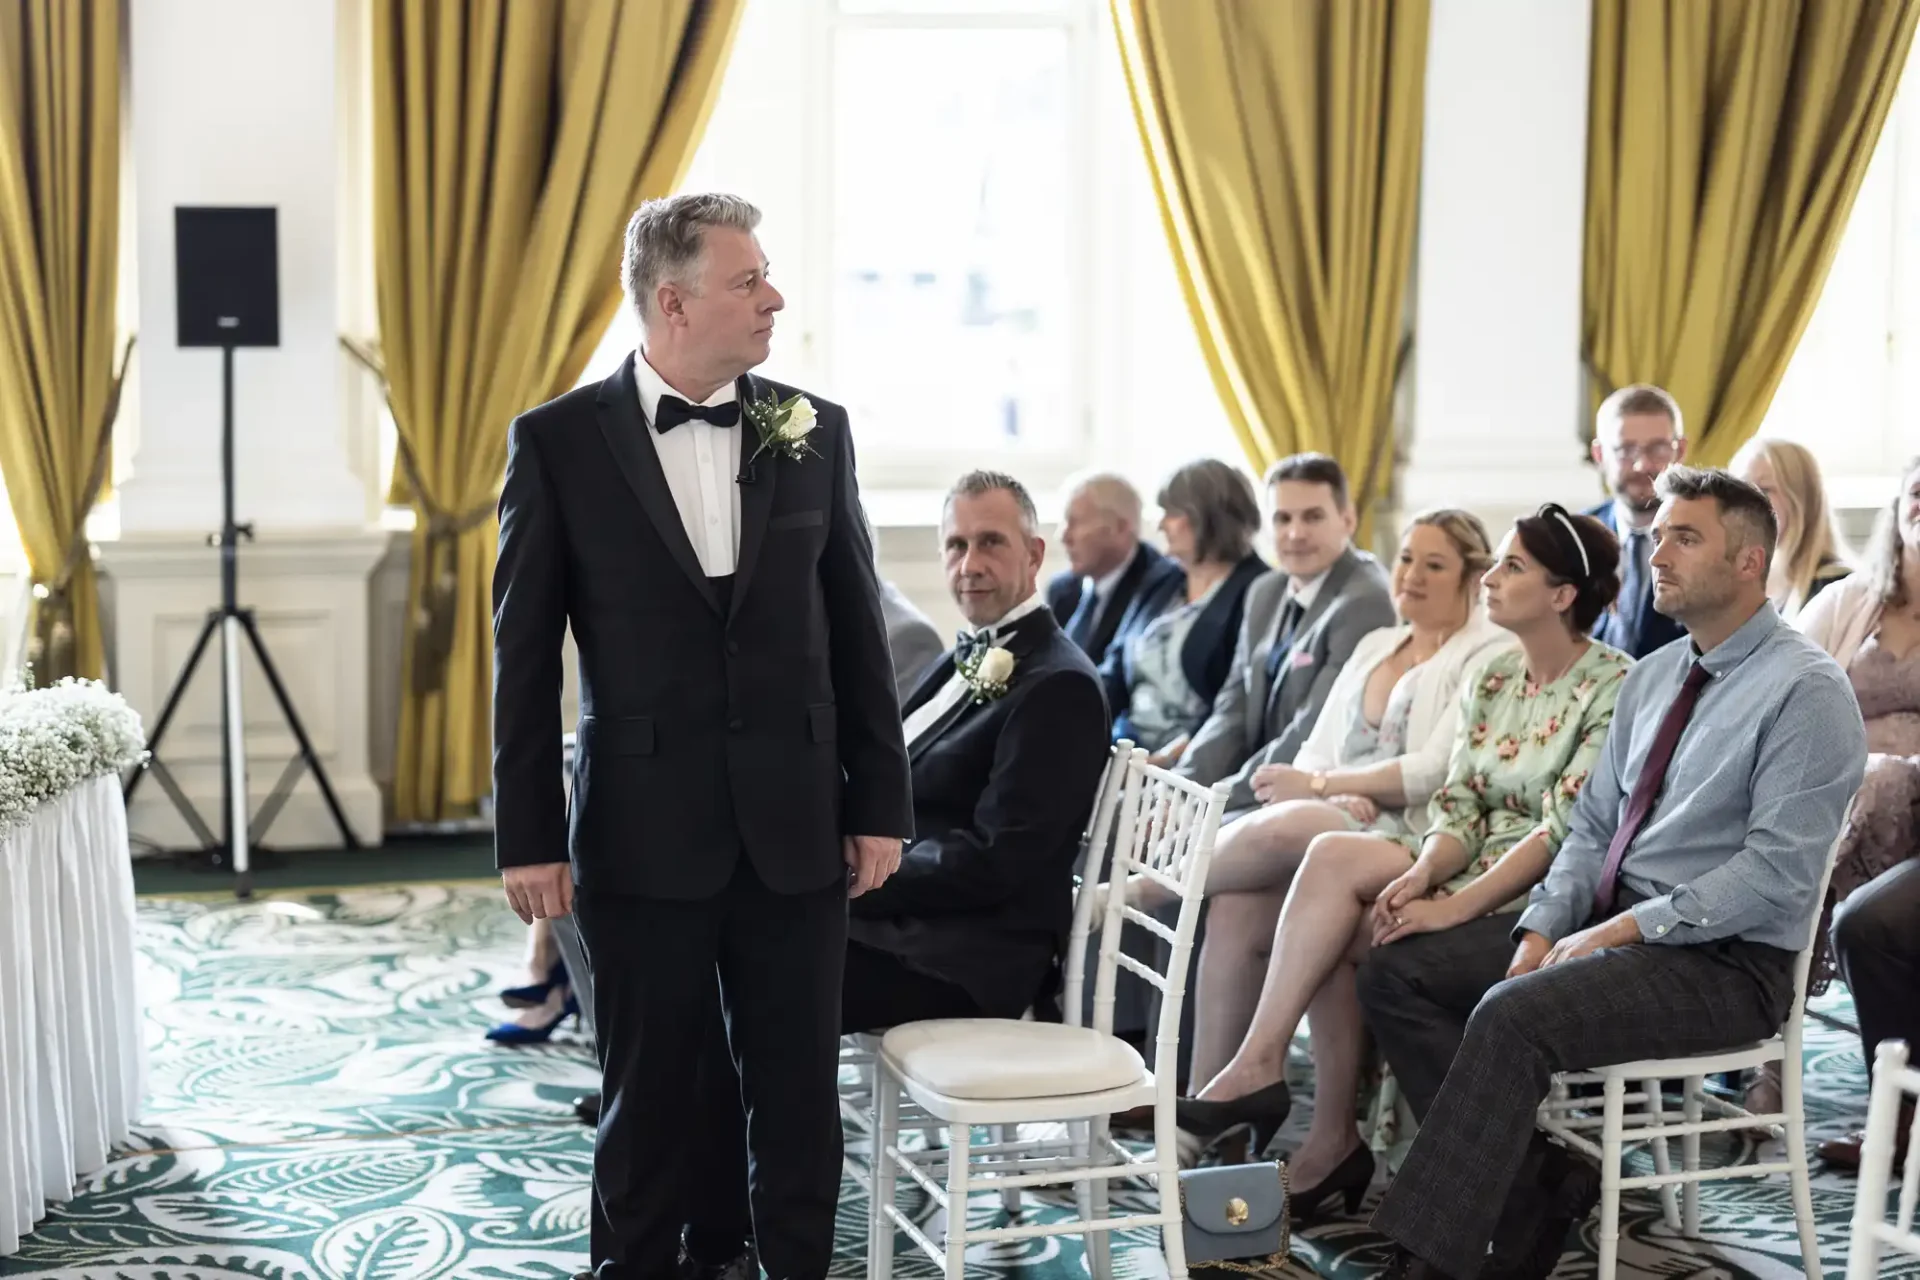 A groom in a black tuxedo stands at the front of a wedding ceremony in an elegant room, with seated guests looking on.